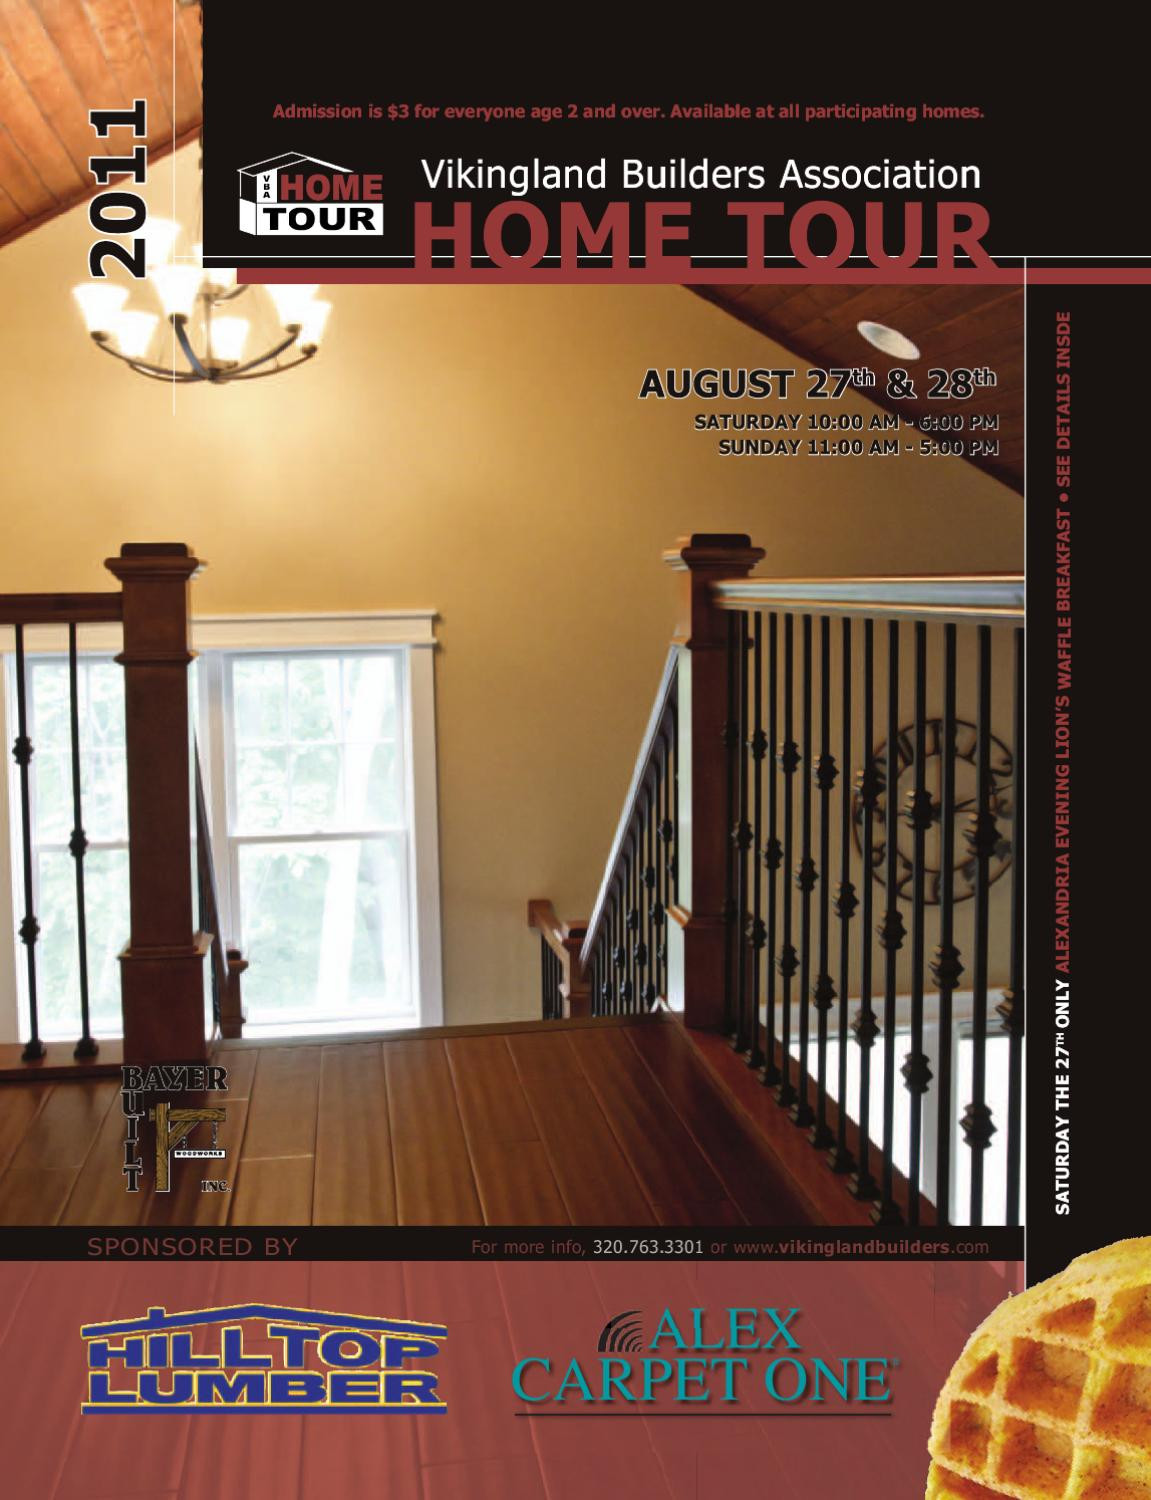 26 Perfect Superior Hardwood Flooring Rockwood Ontario 2022 free download superior hardwood flooring rockwood ontario of vikingland builders association home tour 2011 by echo press issuu in page 1